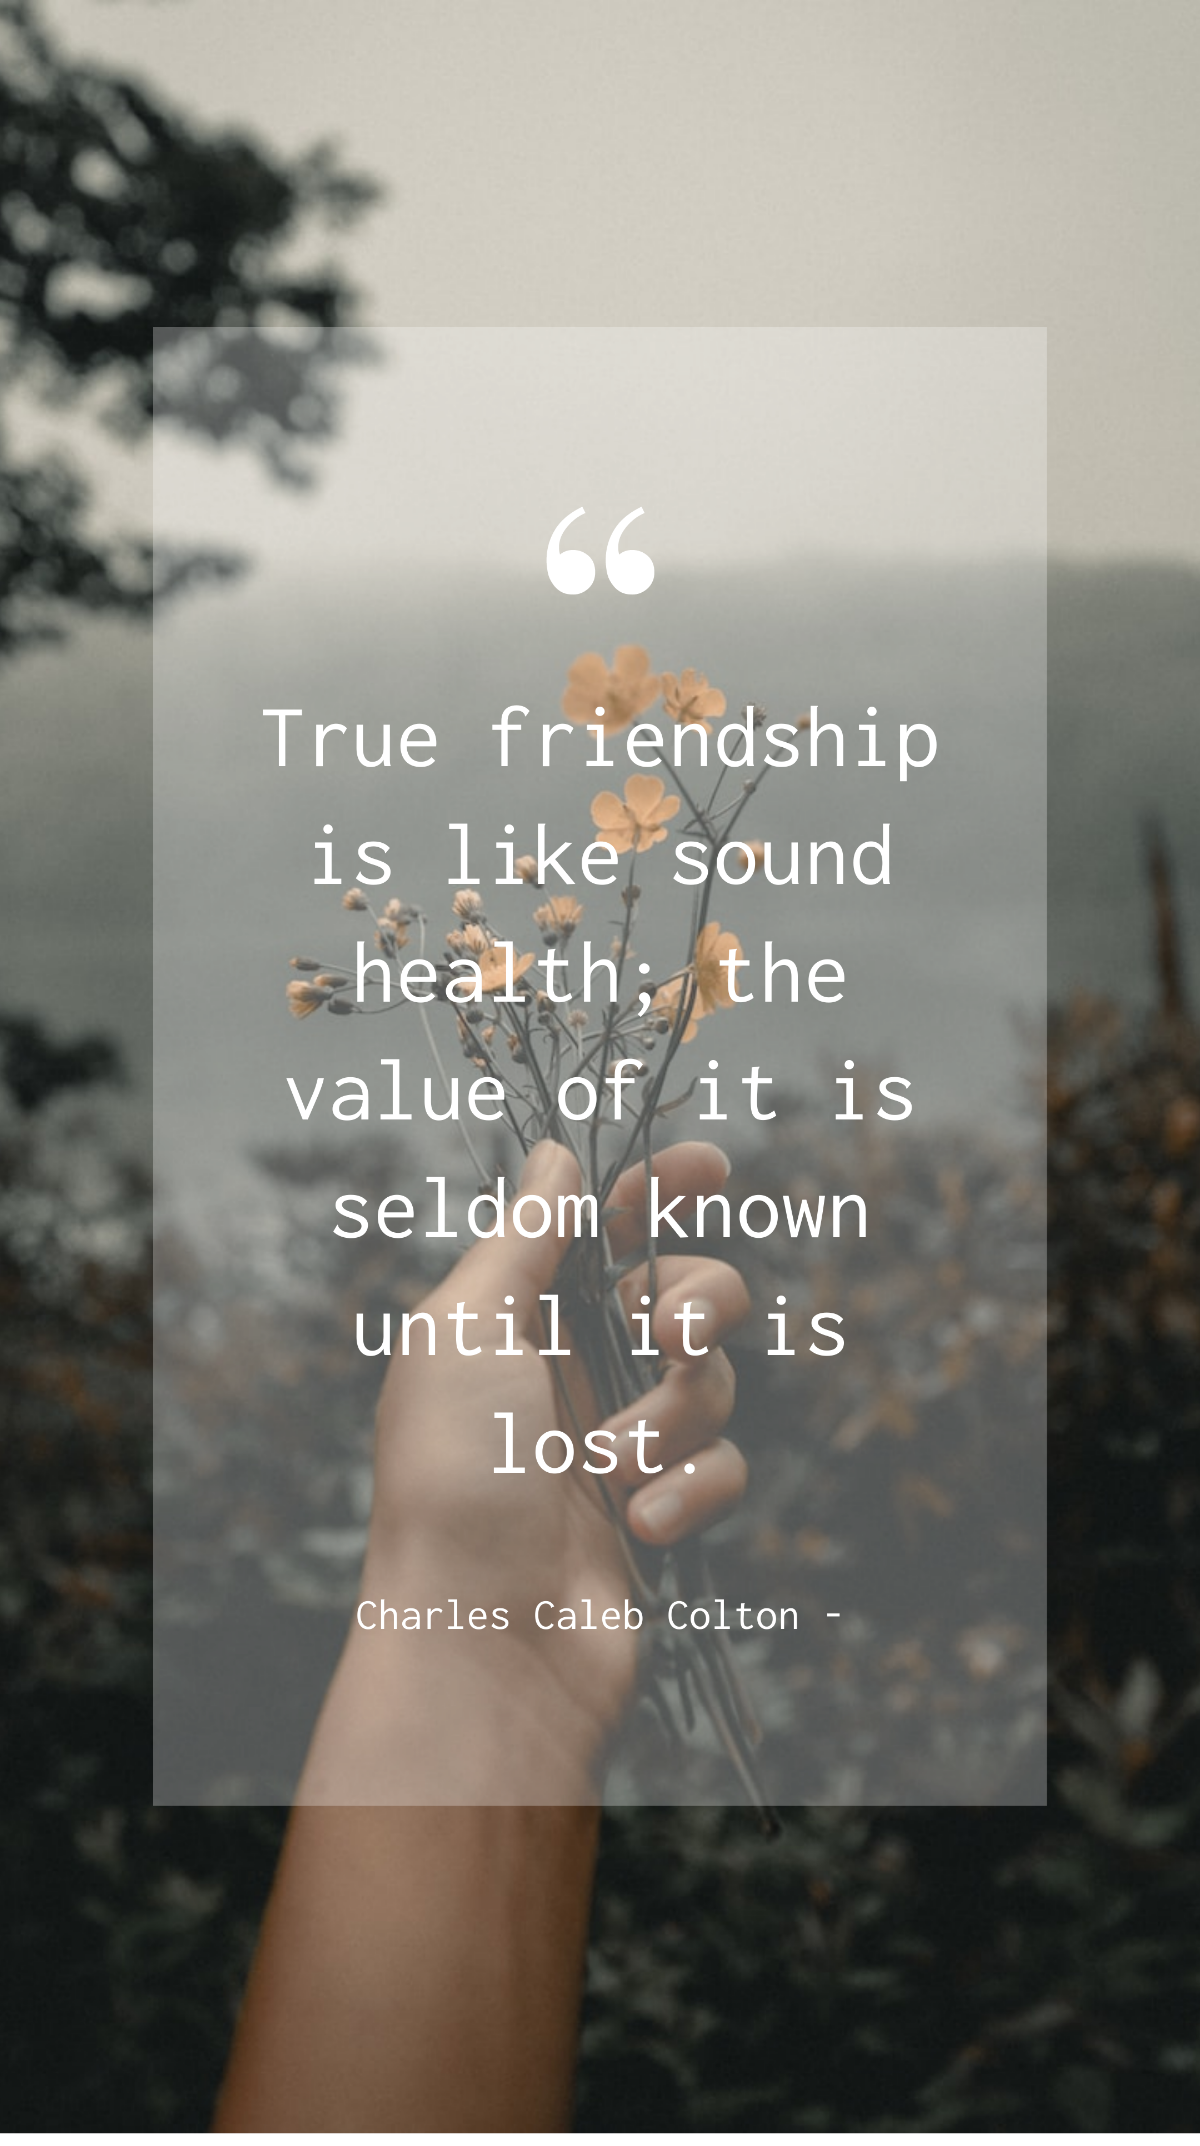 Charles Caleb Colton - True friendship is like sound health; the value of it is seldom known until it is lost. Template